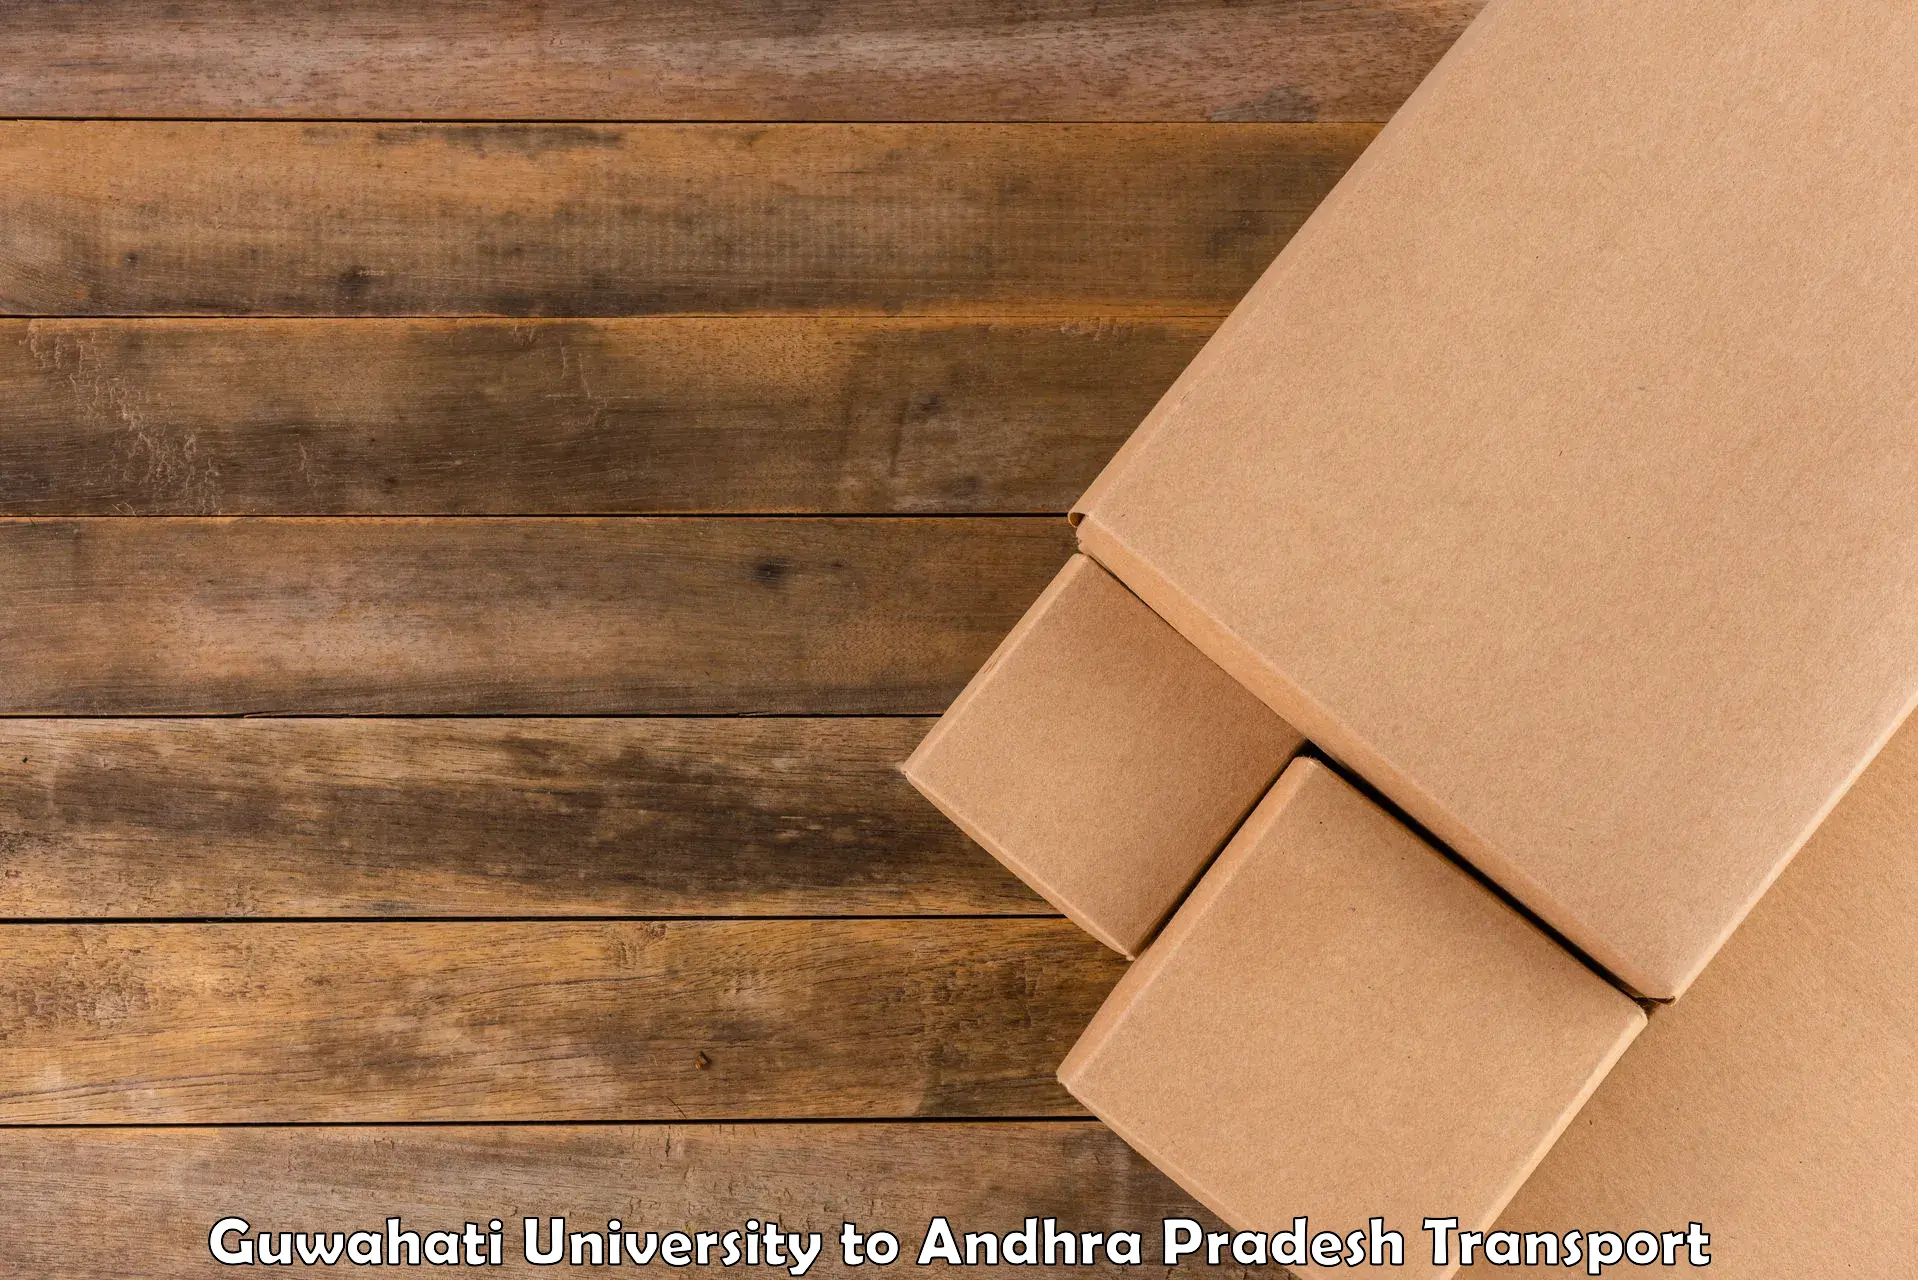 Delivery service Guwahati University to Chittoor